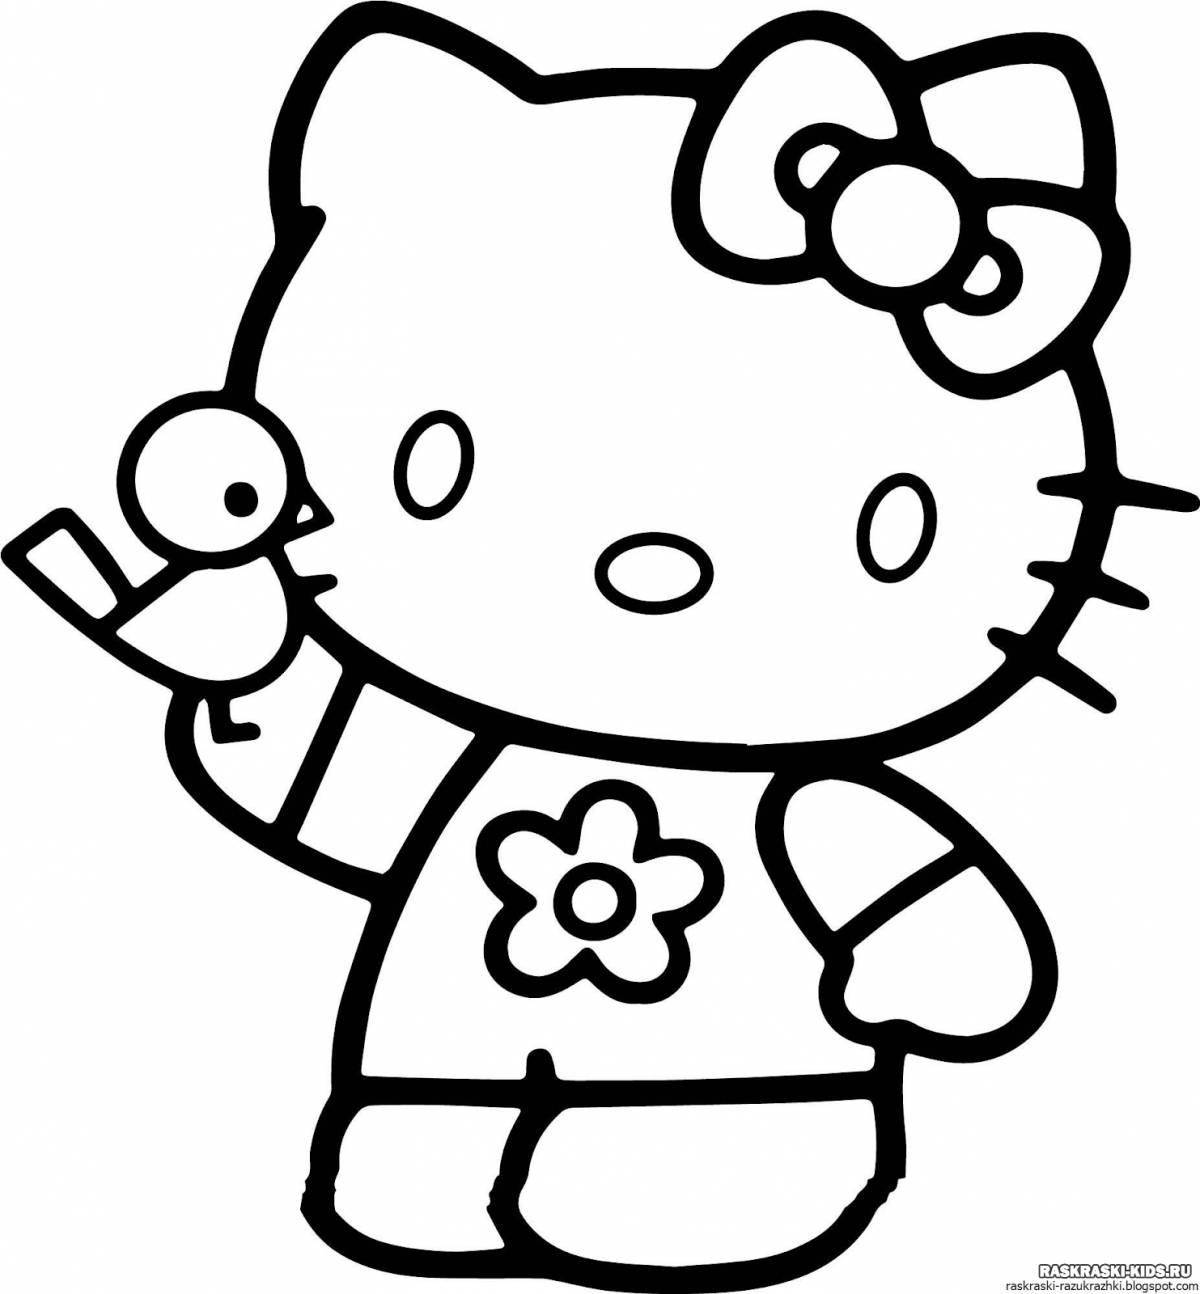 Cute hello kitty coloring with heart